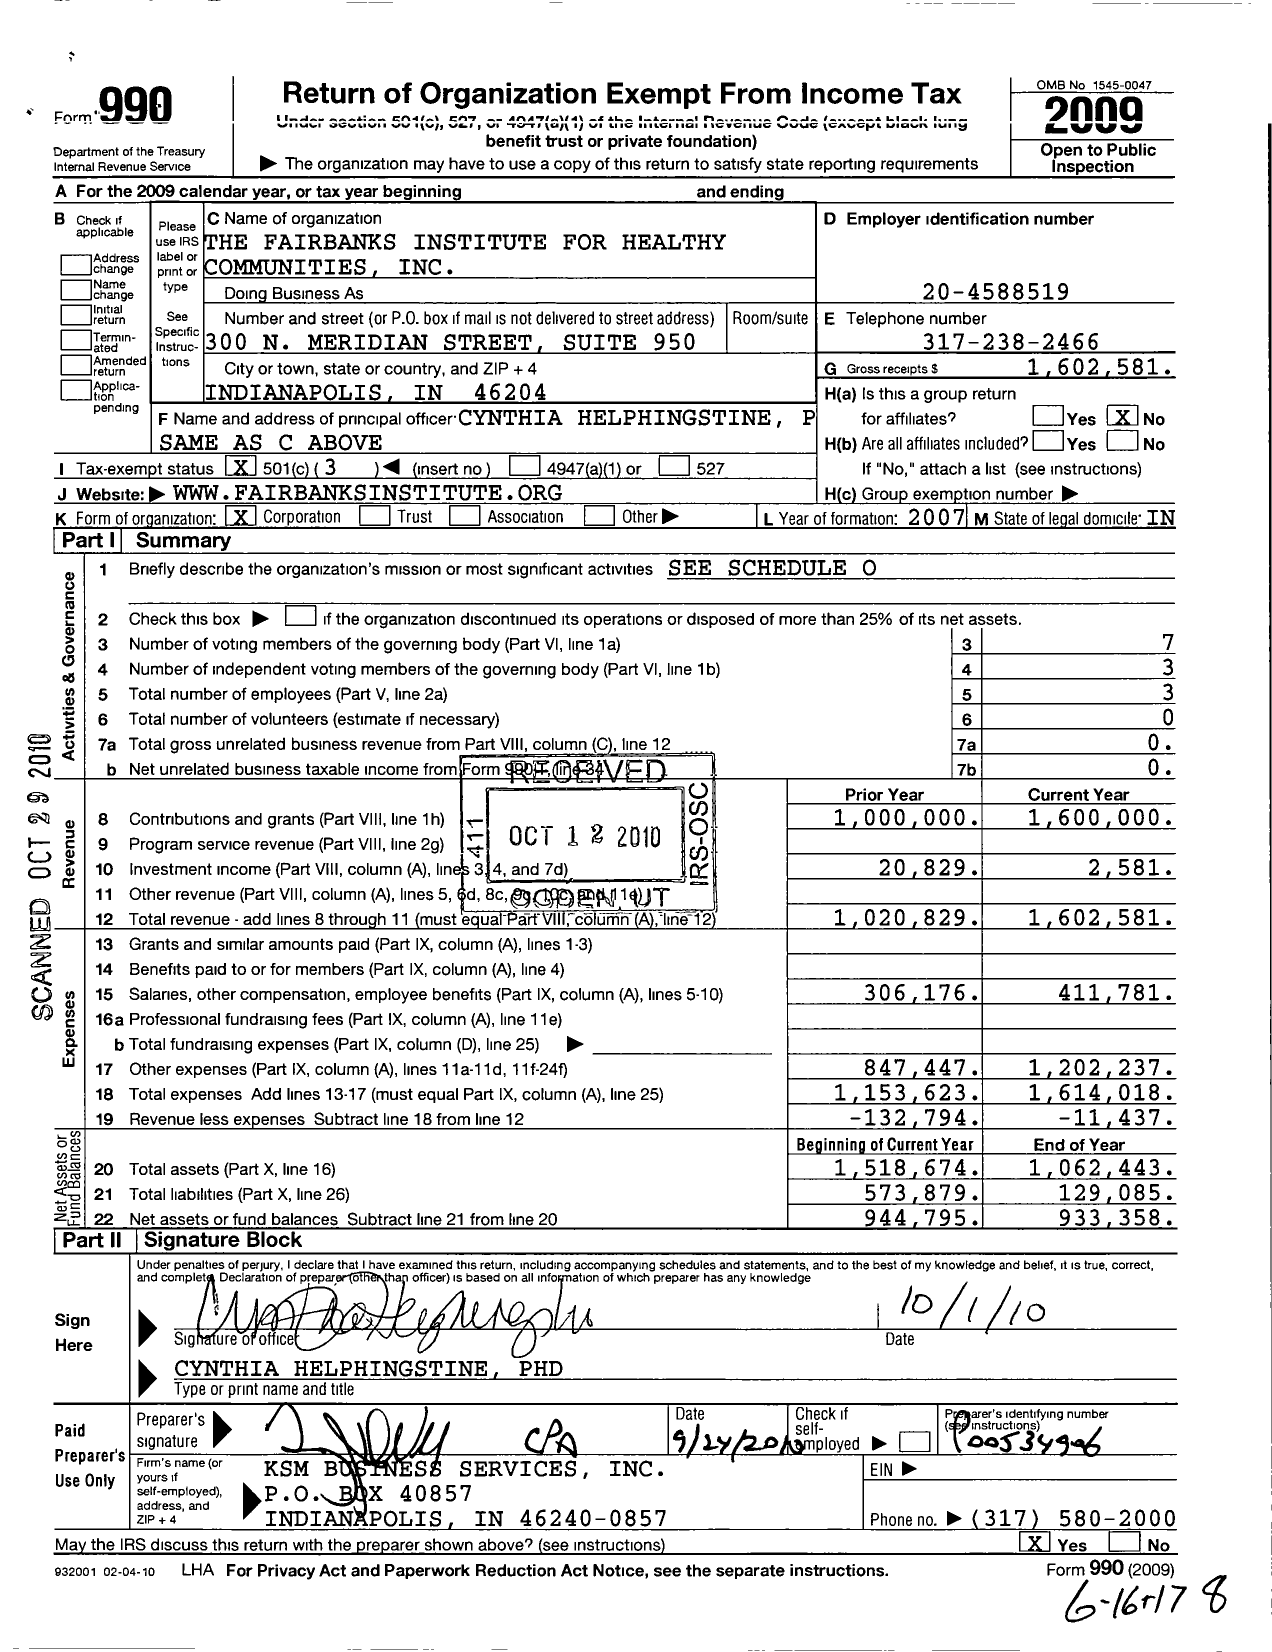 Image of first page of 2009 Form 990 for The Fairbanks Institute for Healthy Communities